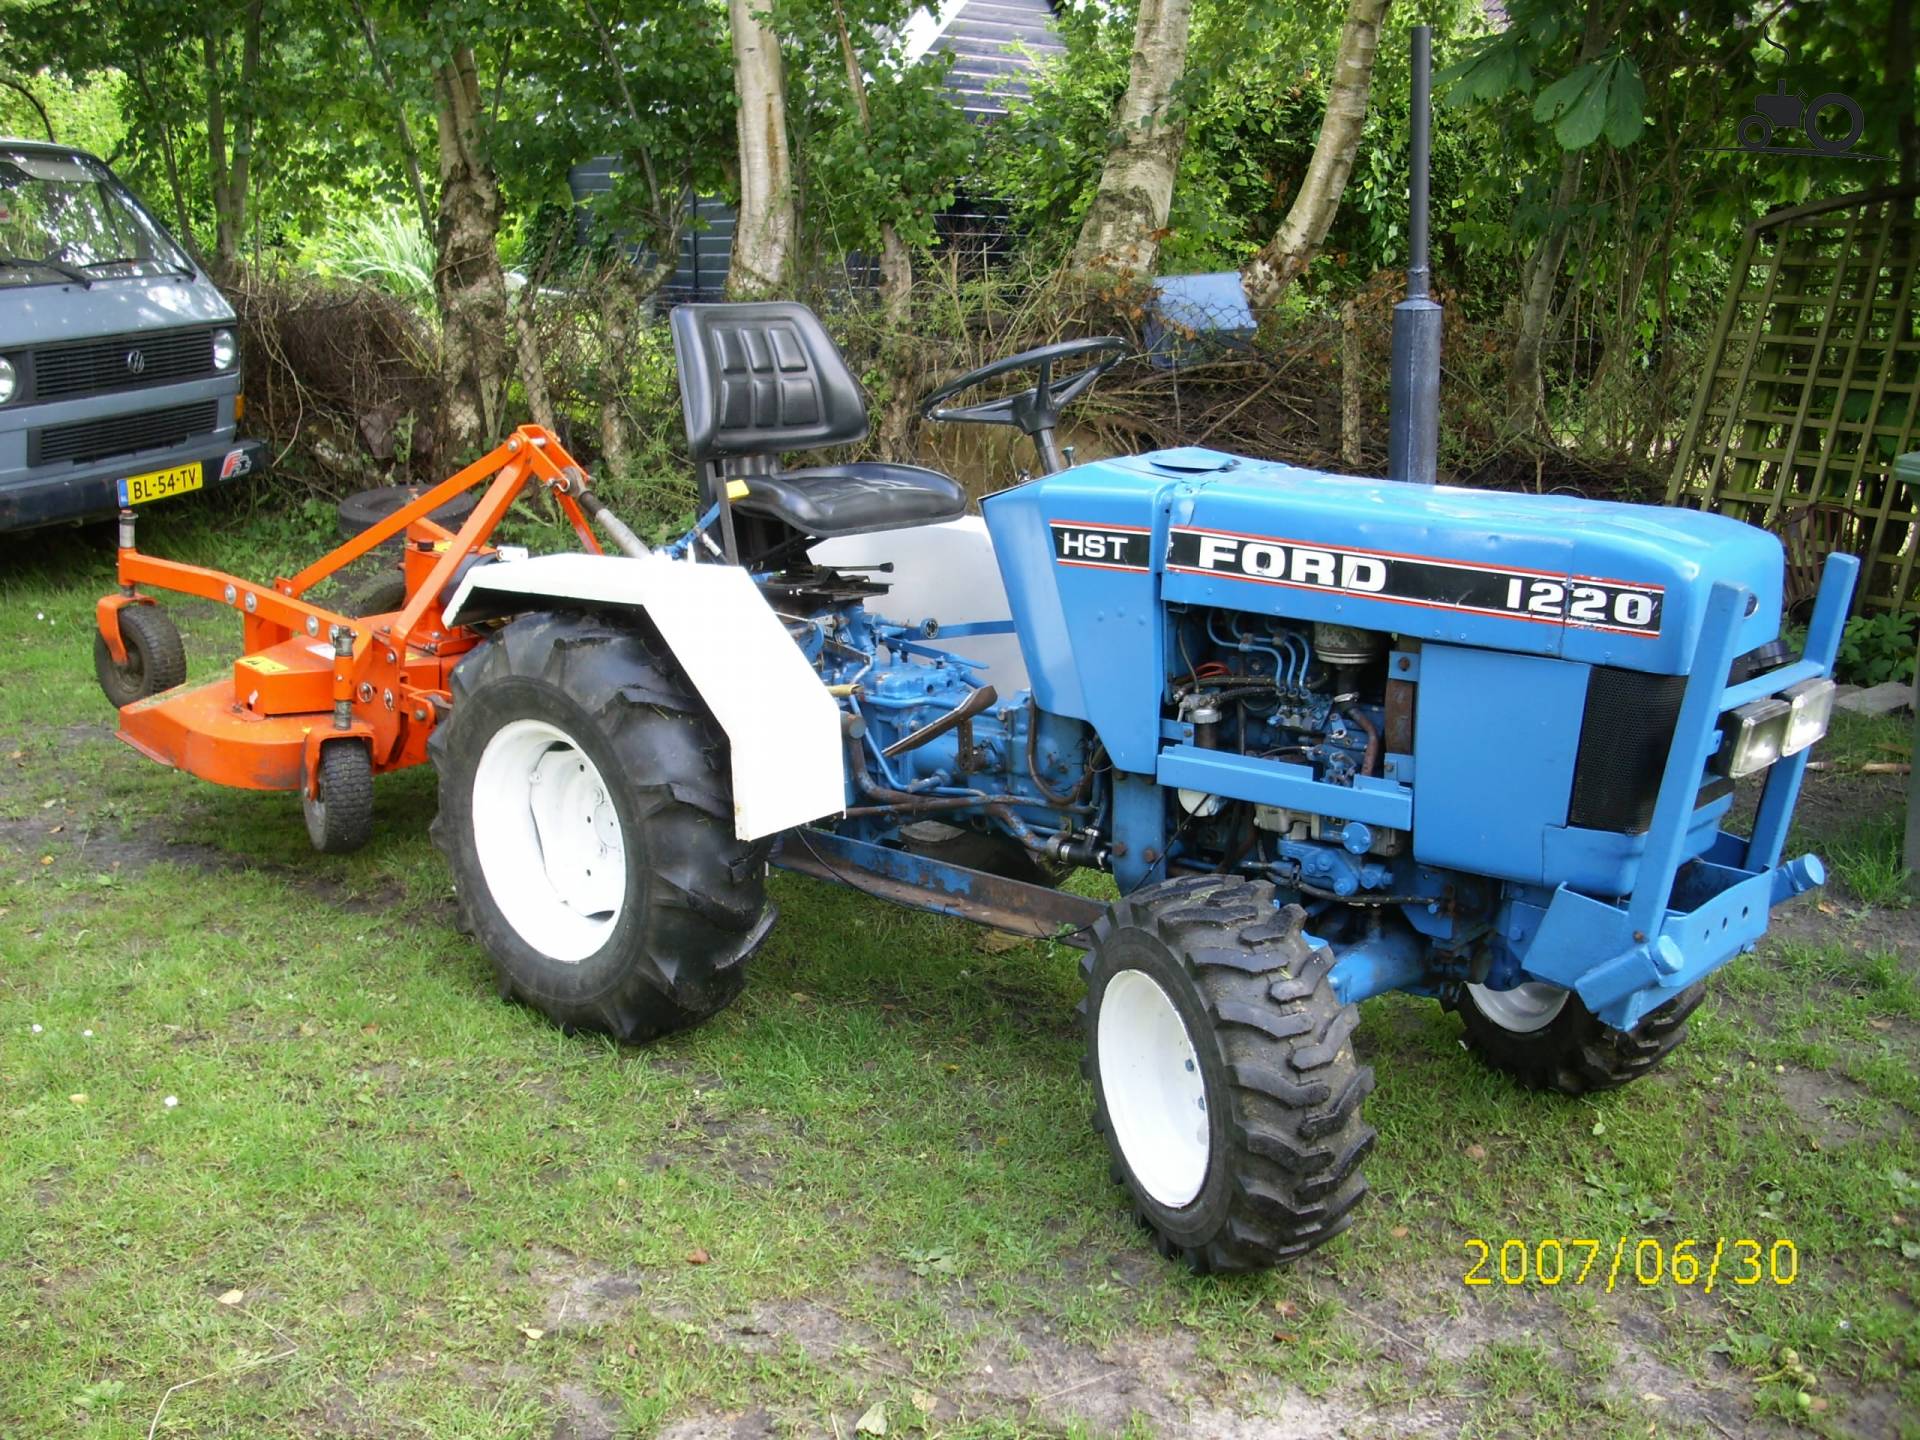 ... Ford 1220 Tractor Parts moreover Ford New Holland Tractors. on 1220